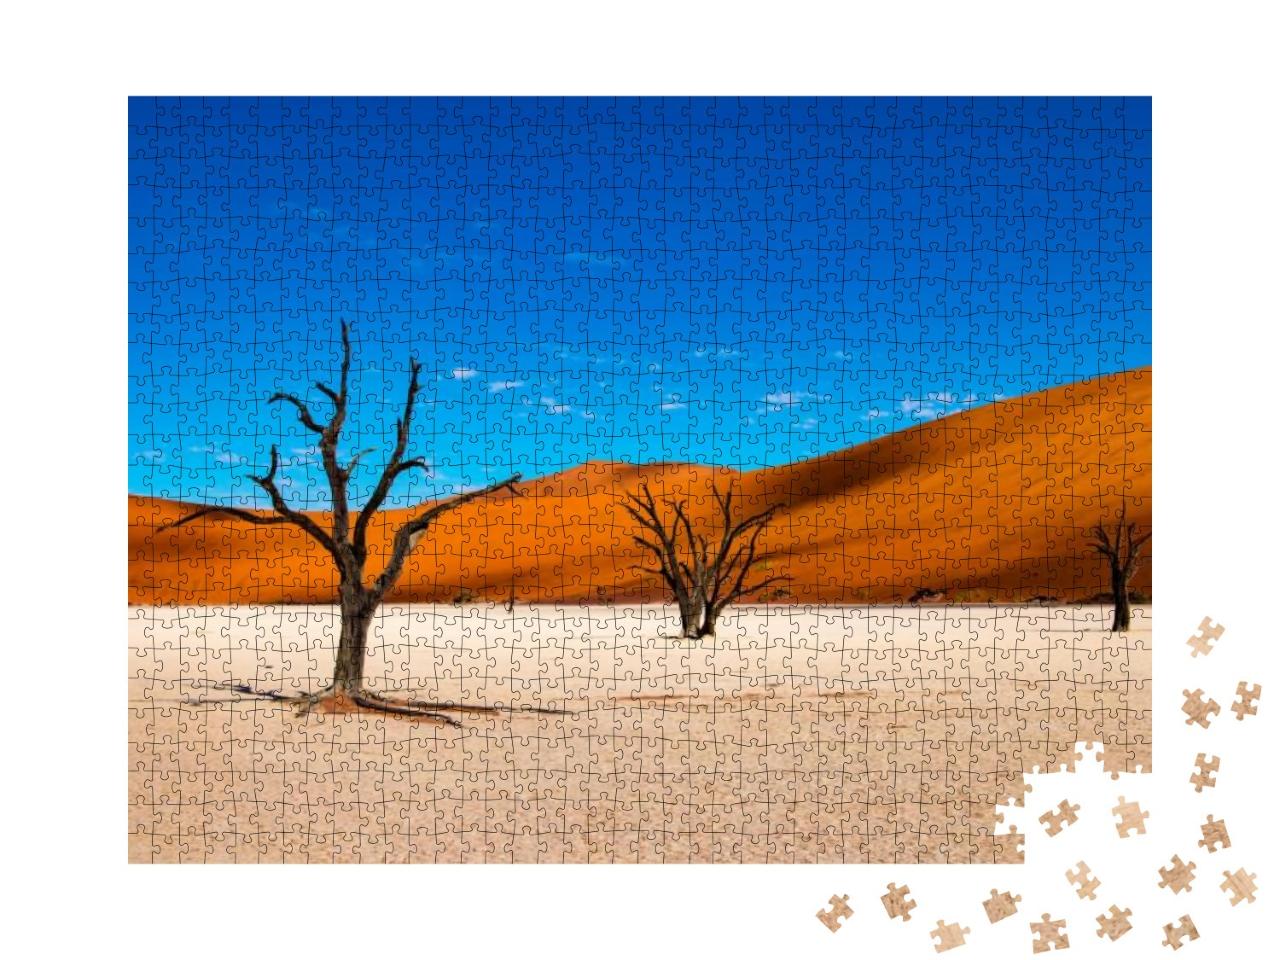 Deadvlei is a White Clay Pan Located Near the More Famous... Jigsaw Puzzle with 1000 pieces